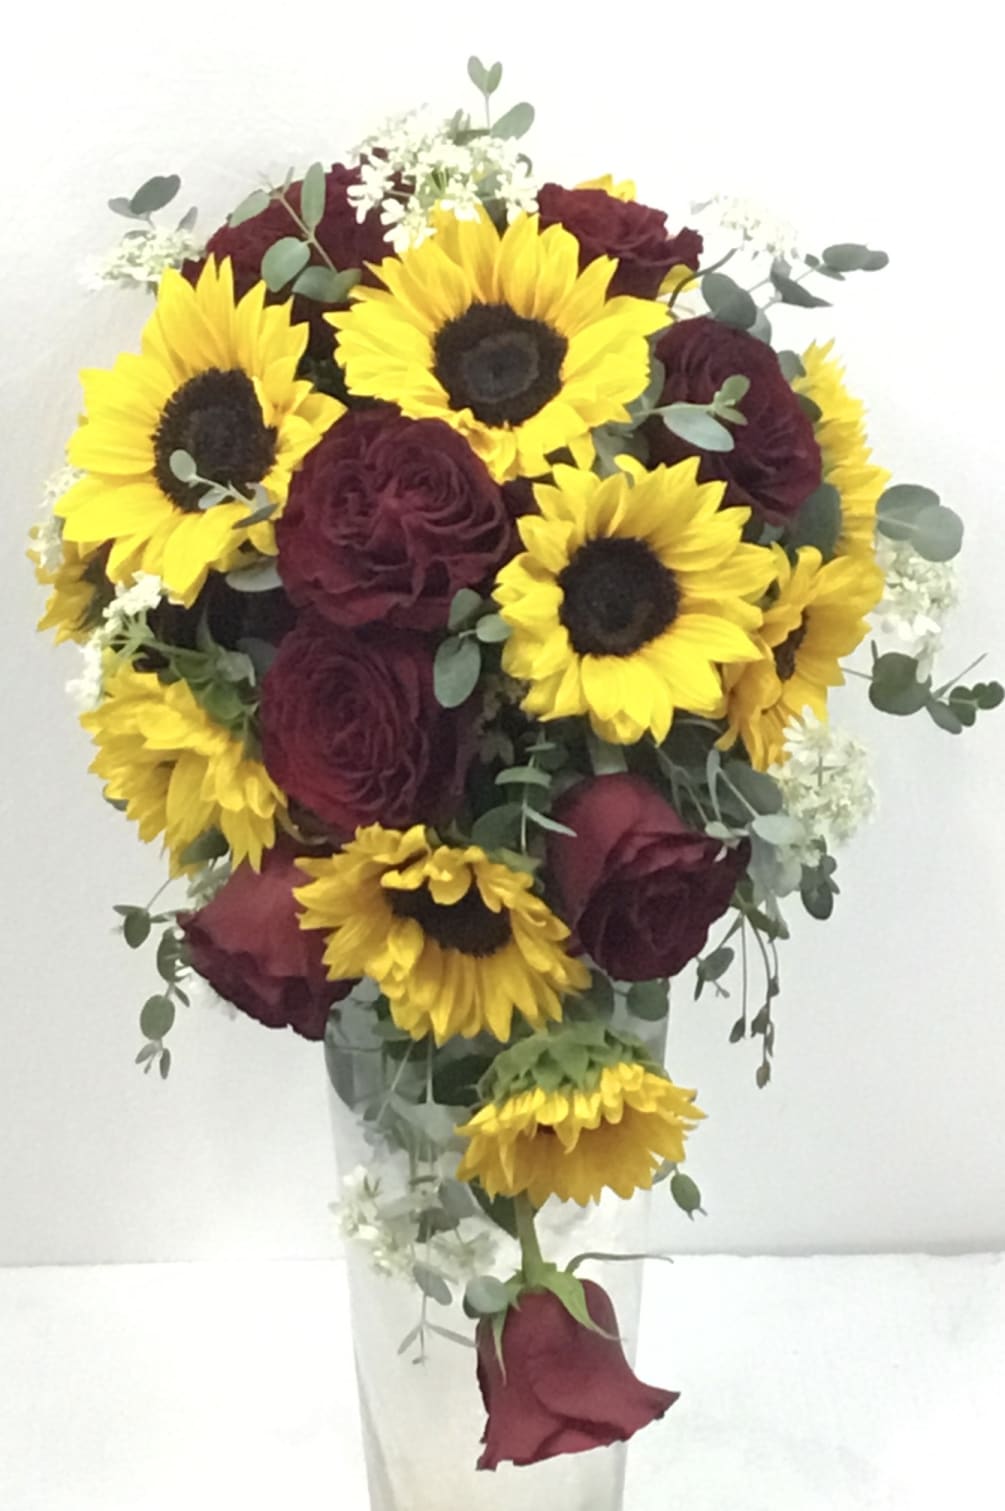 Fresh Flower Bridal Bouquet that includes sunflowers and Roses. In a cascading